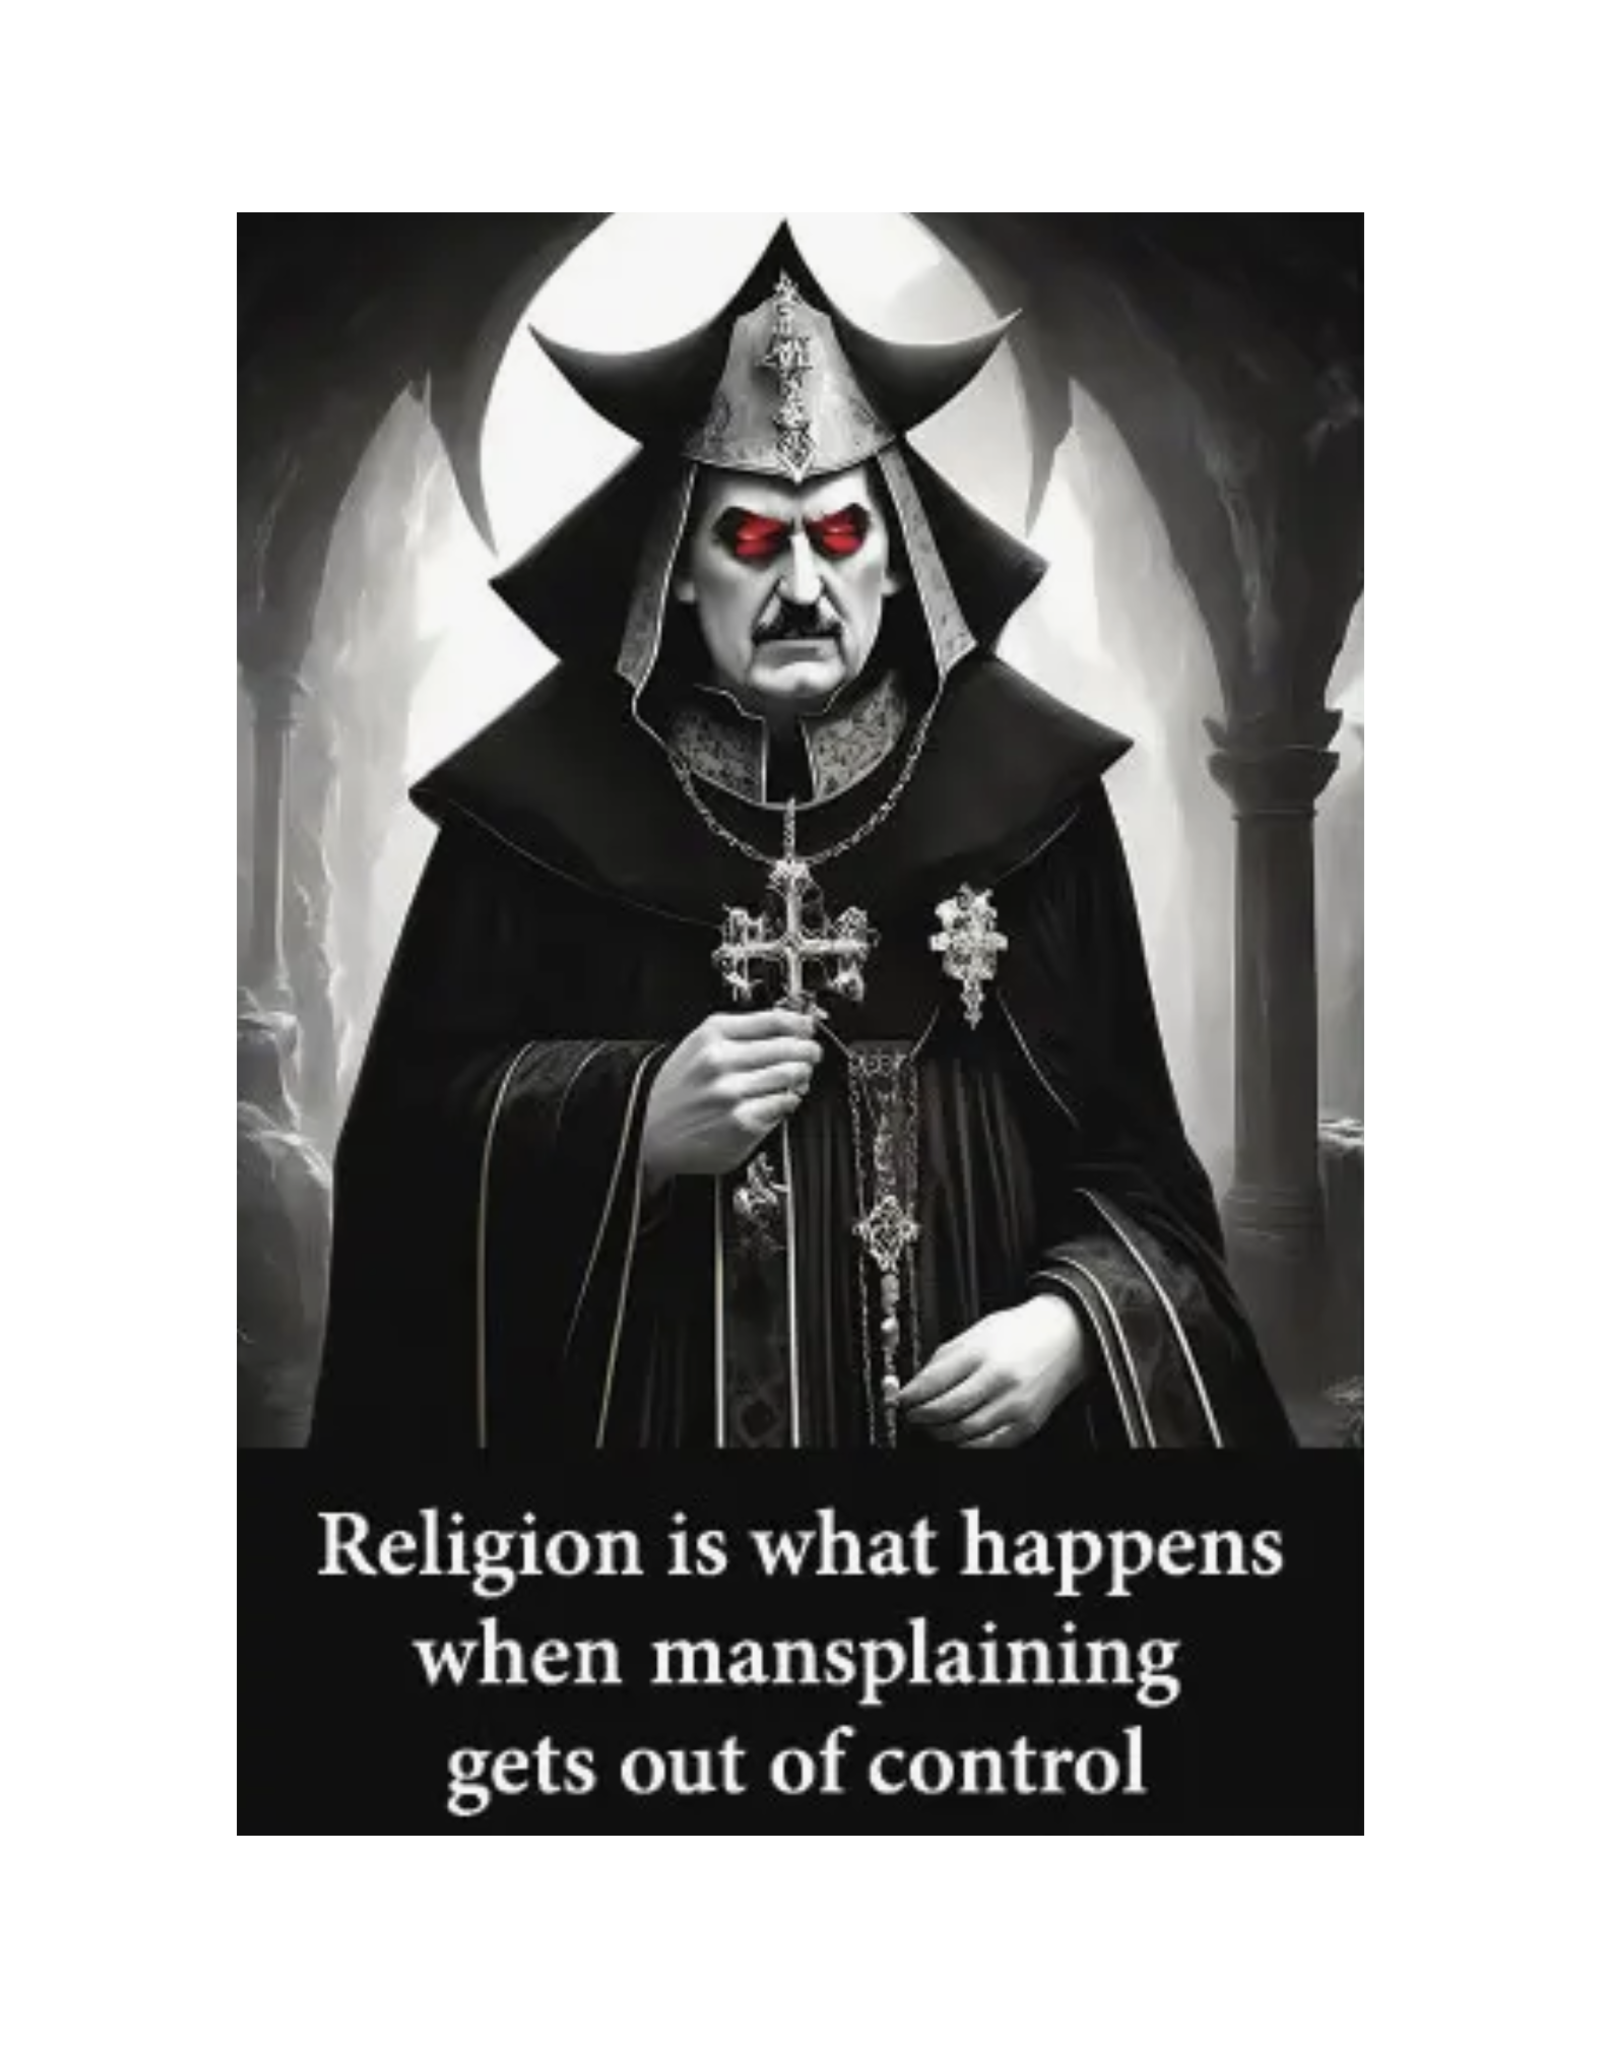 Religion is Out of Control Mansplaining Magnet